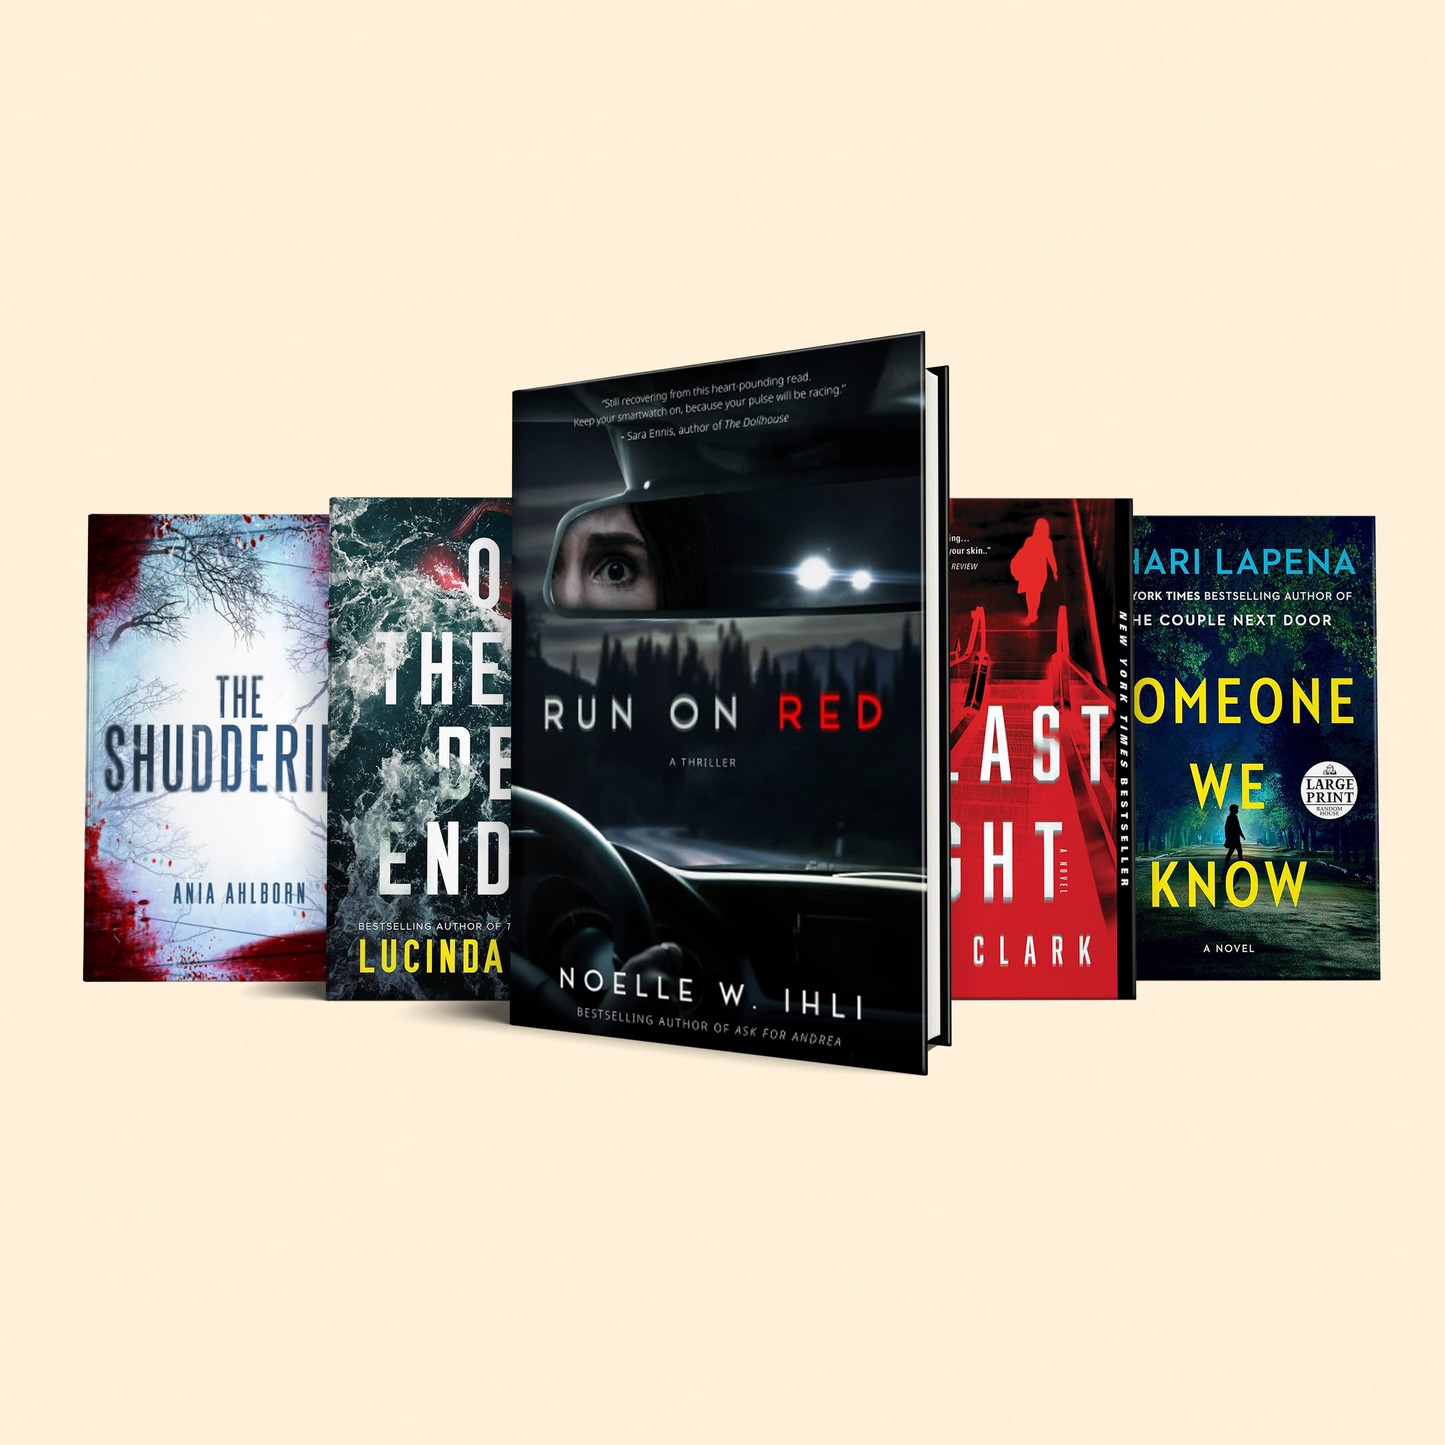 5 Fast paced thrillers : (Run on red, The last flight, Someone we know, Off the deep end, The shuddering)